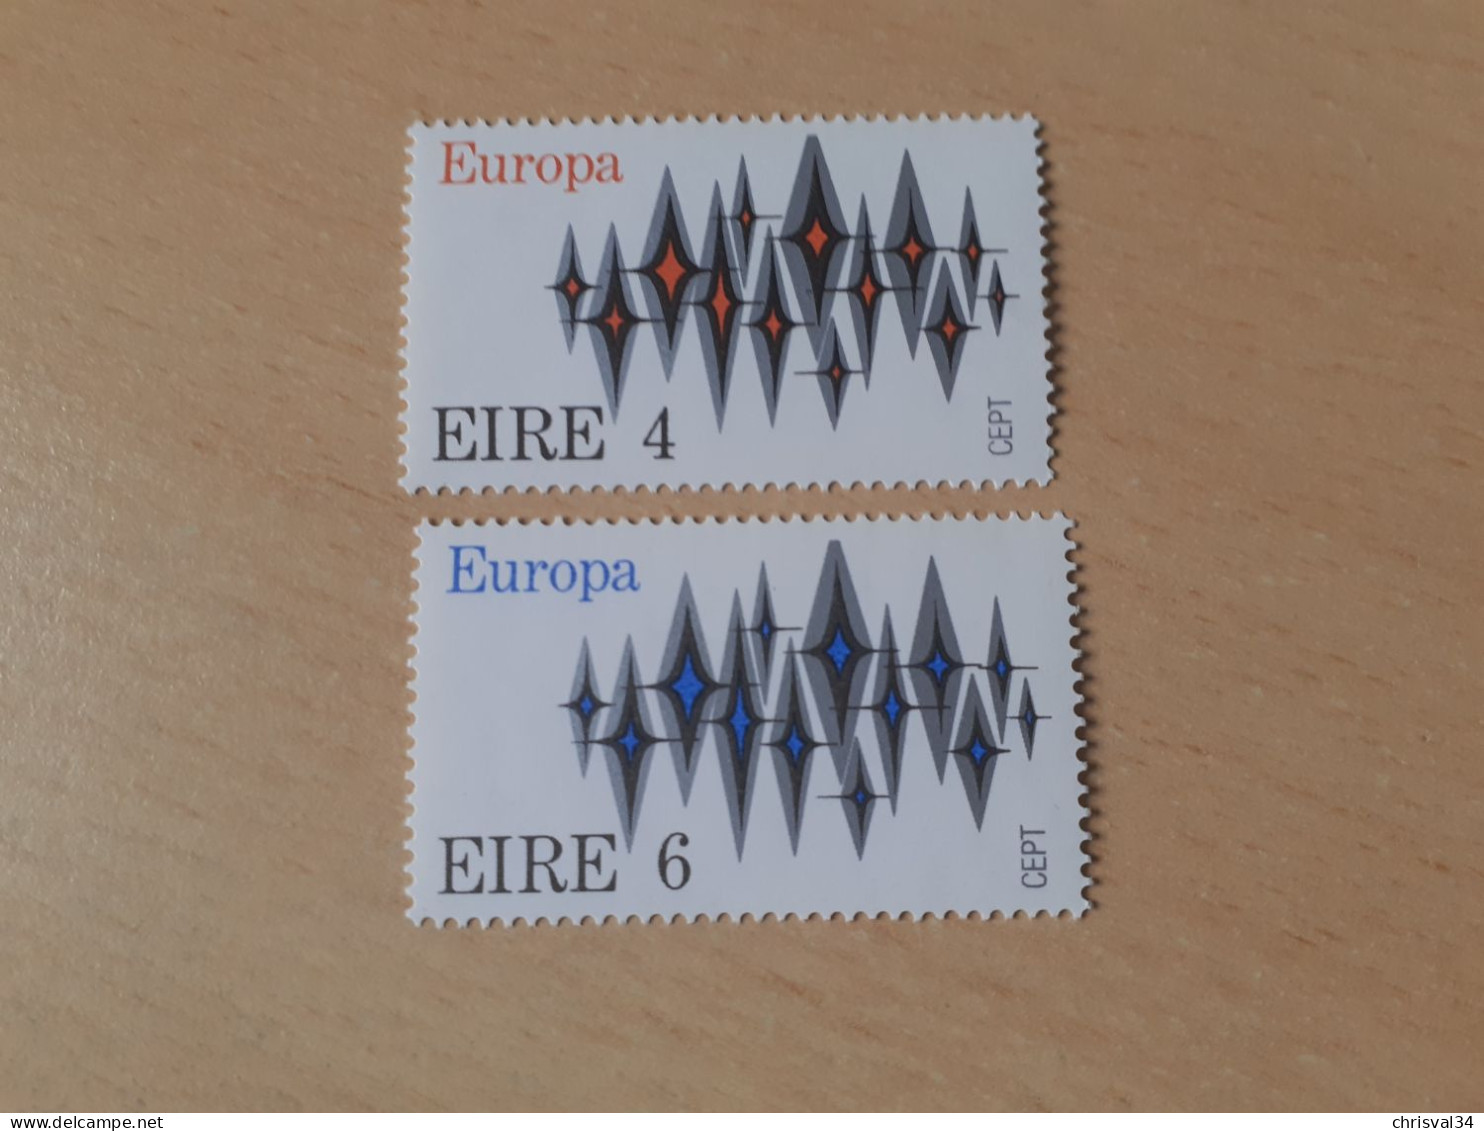 TIMBRES   IRLANDE   ANNEE   1972   N  278  /  279   COTE  20,00  EUROS   NEUFS  LUXE** - Nuevos